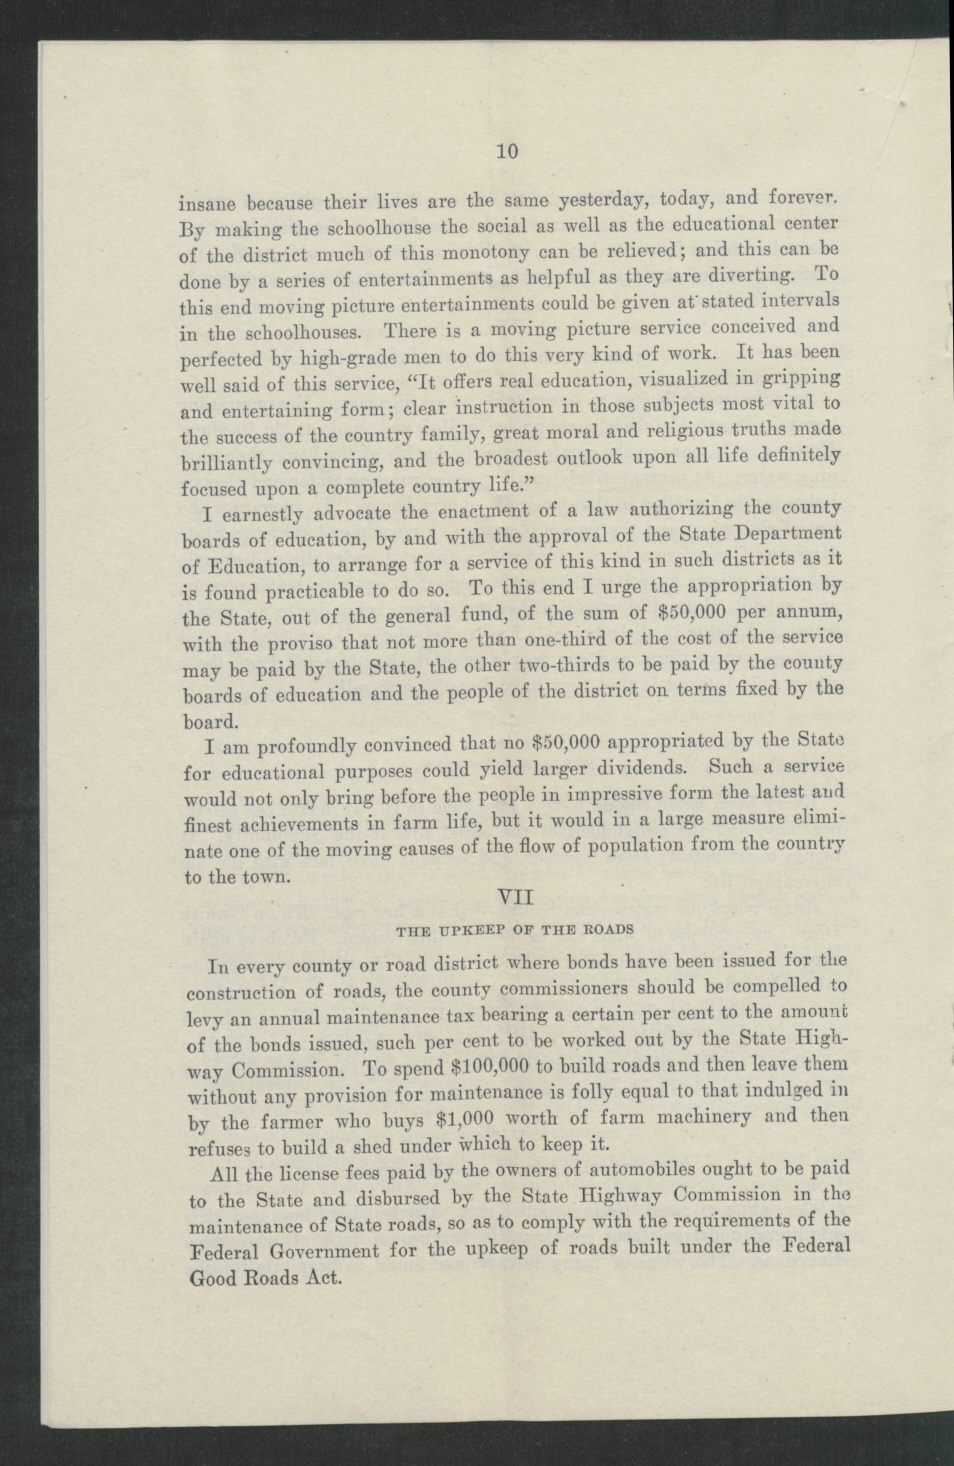 Inaugural Address of Governor Thomas W. Bickett to the General Assembly, January 11, 1917, page 8